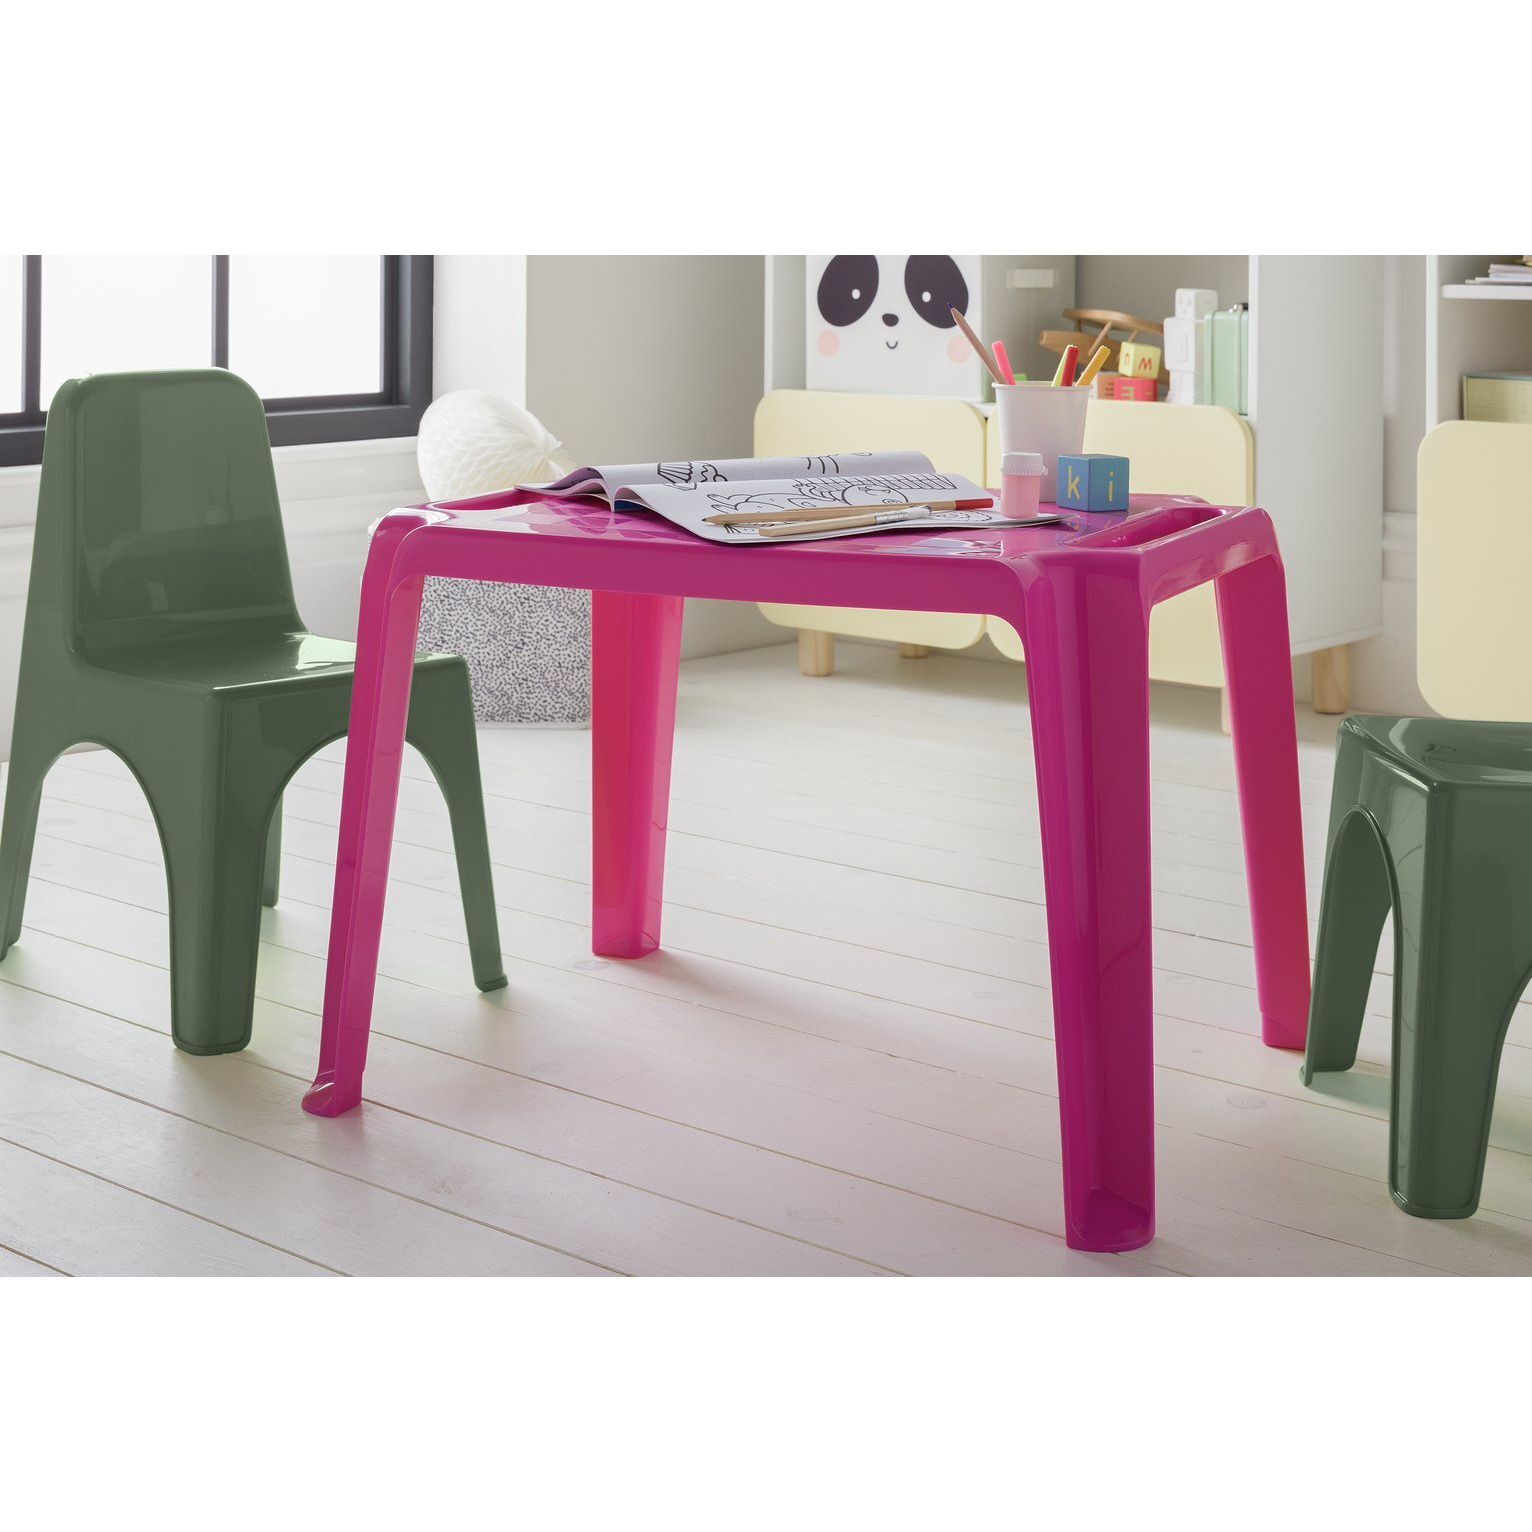 Bica Kids Set of 2 Green Plastic Chairs - image 1